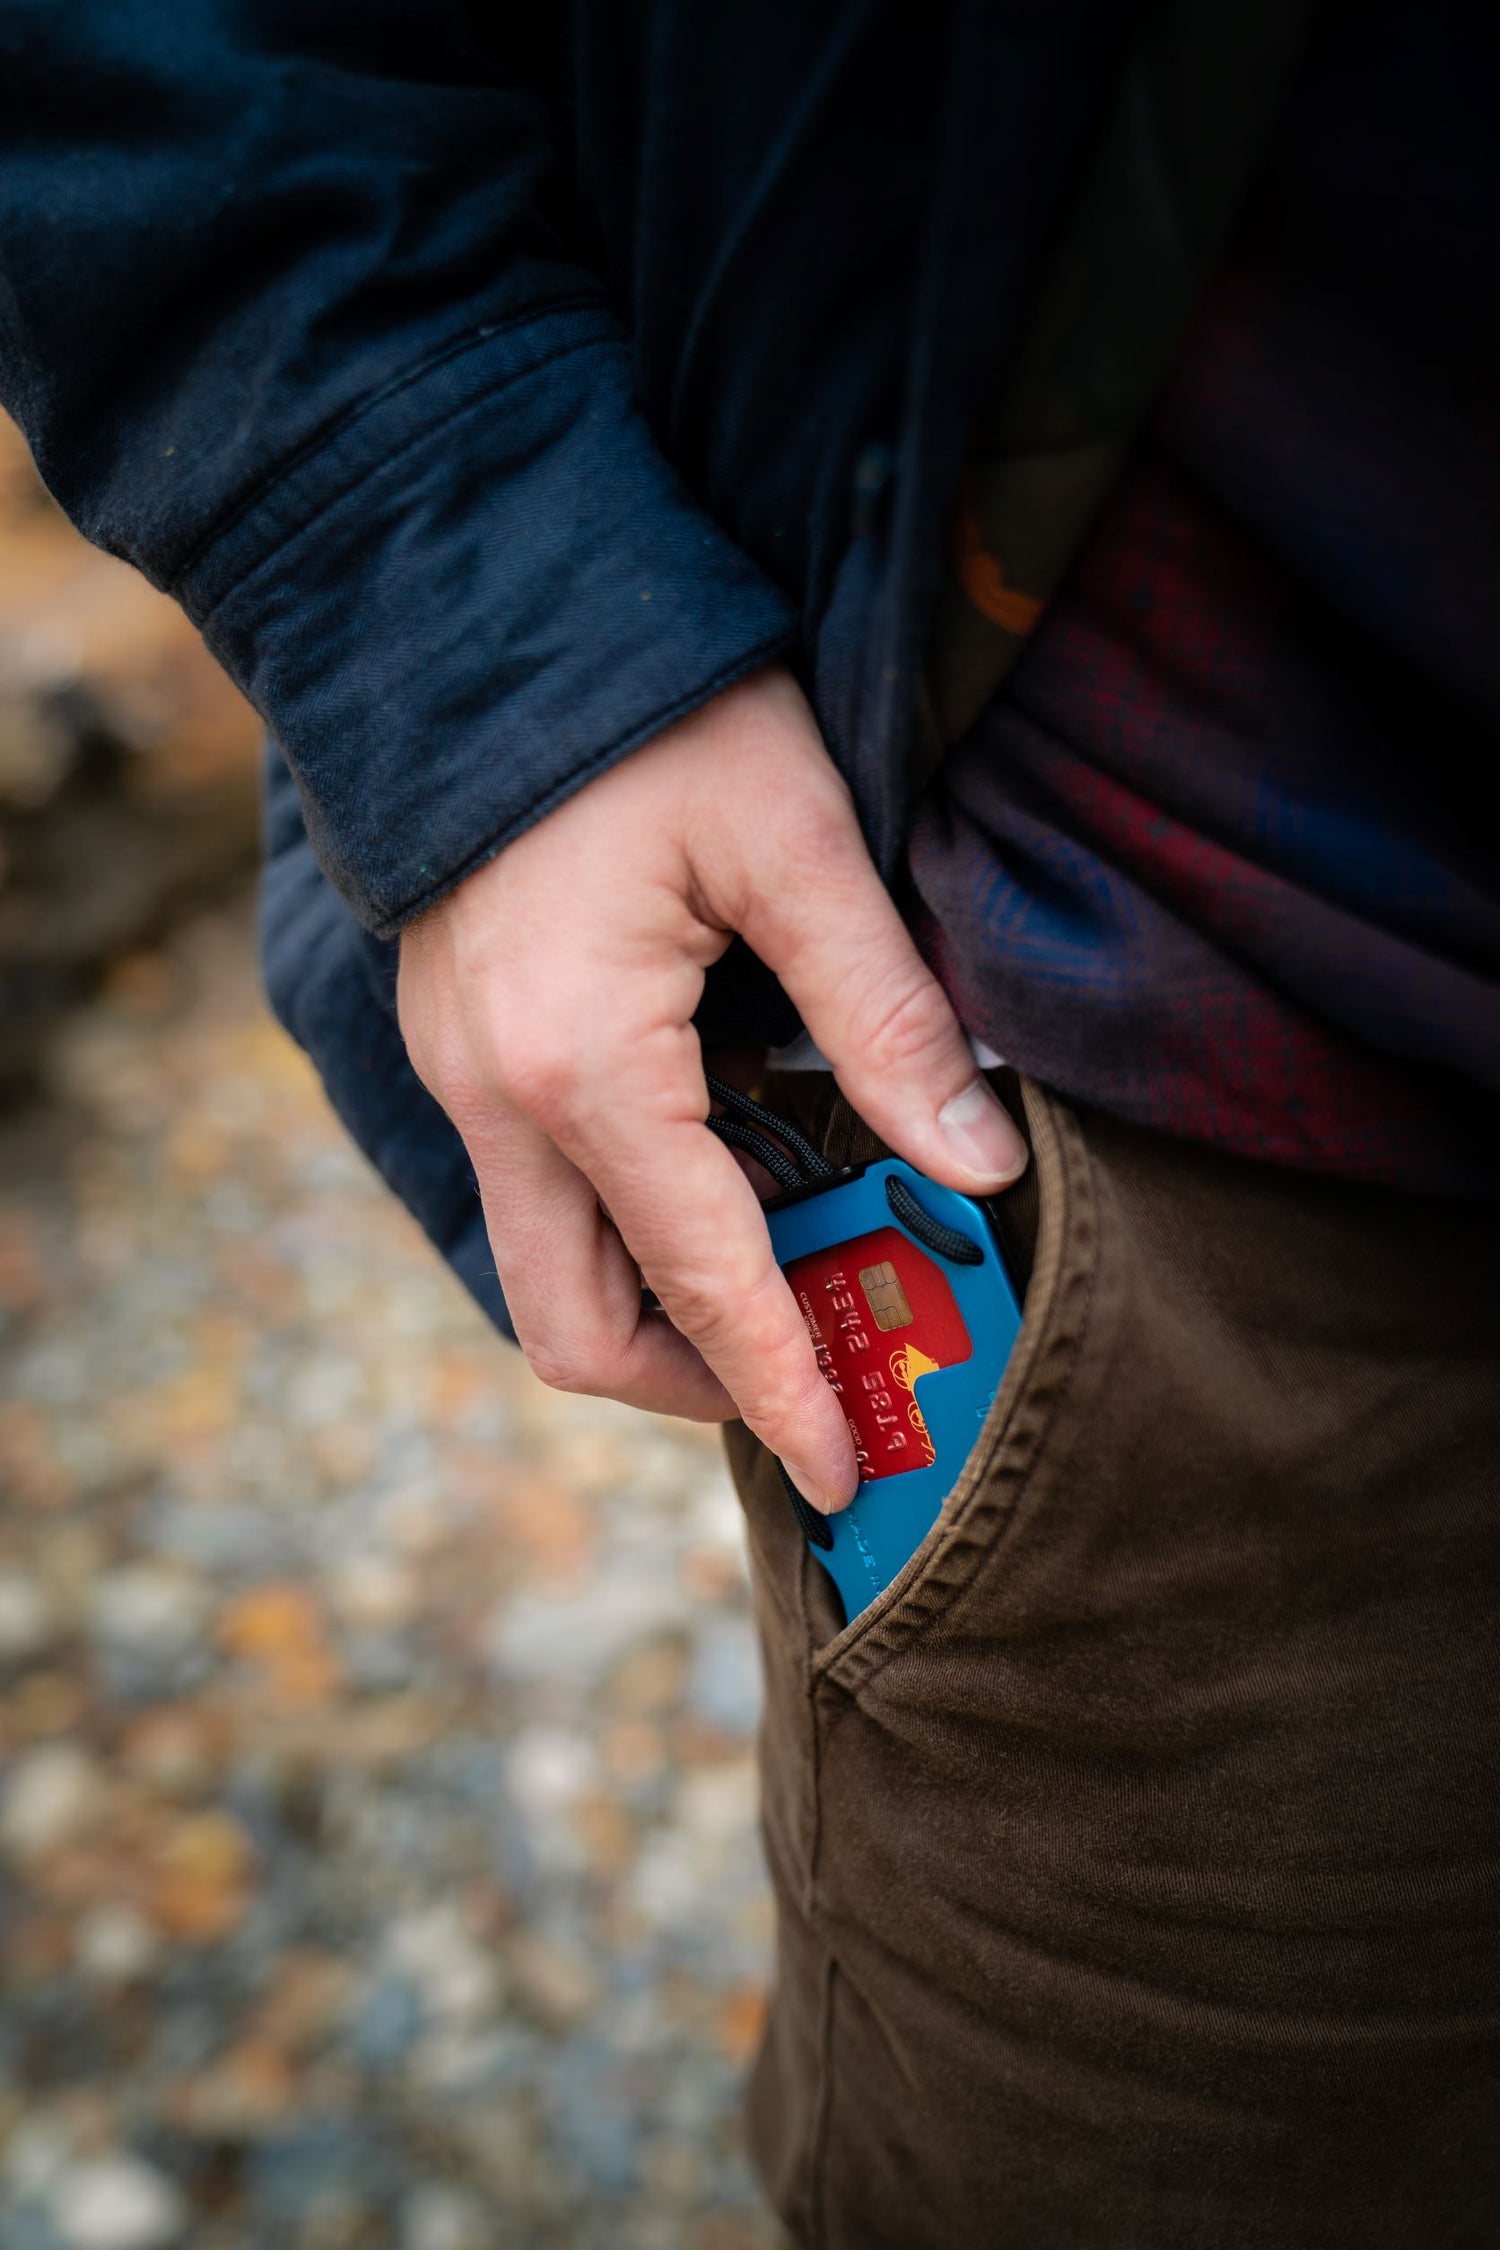 10 Reasons to Carry a Front Pocket Wallet